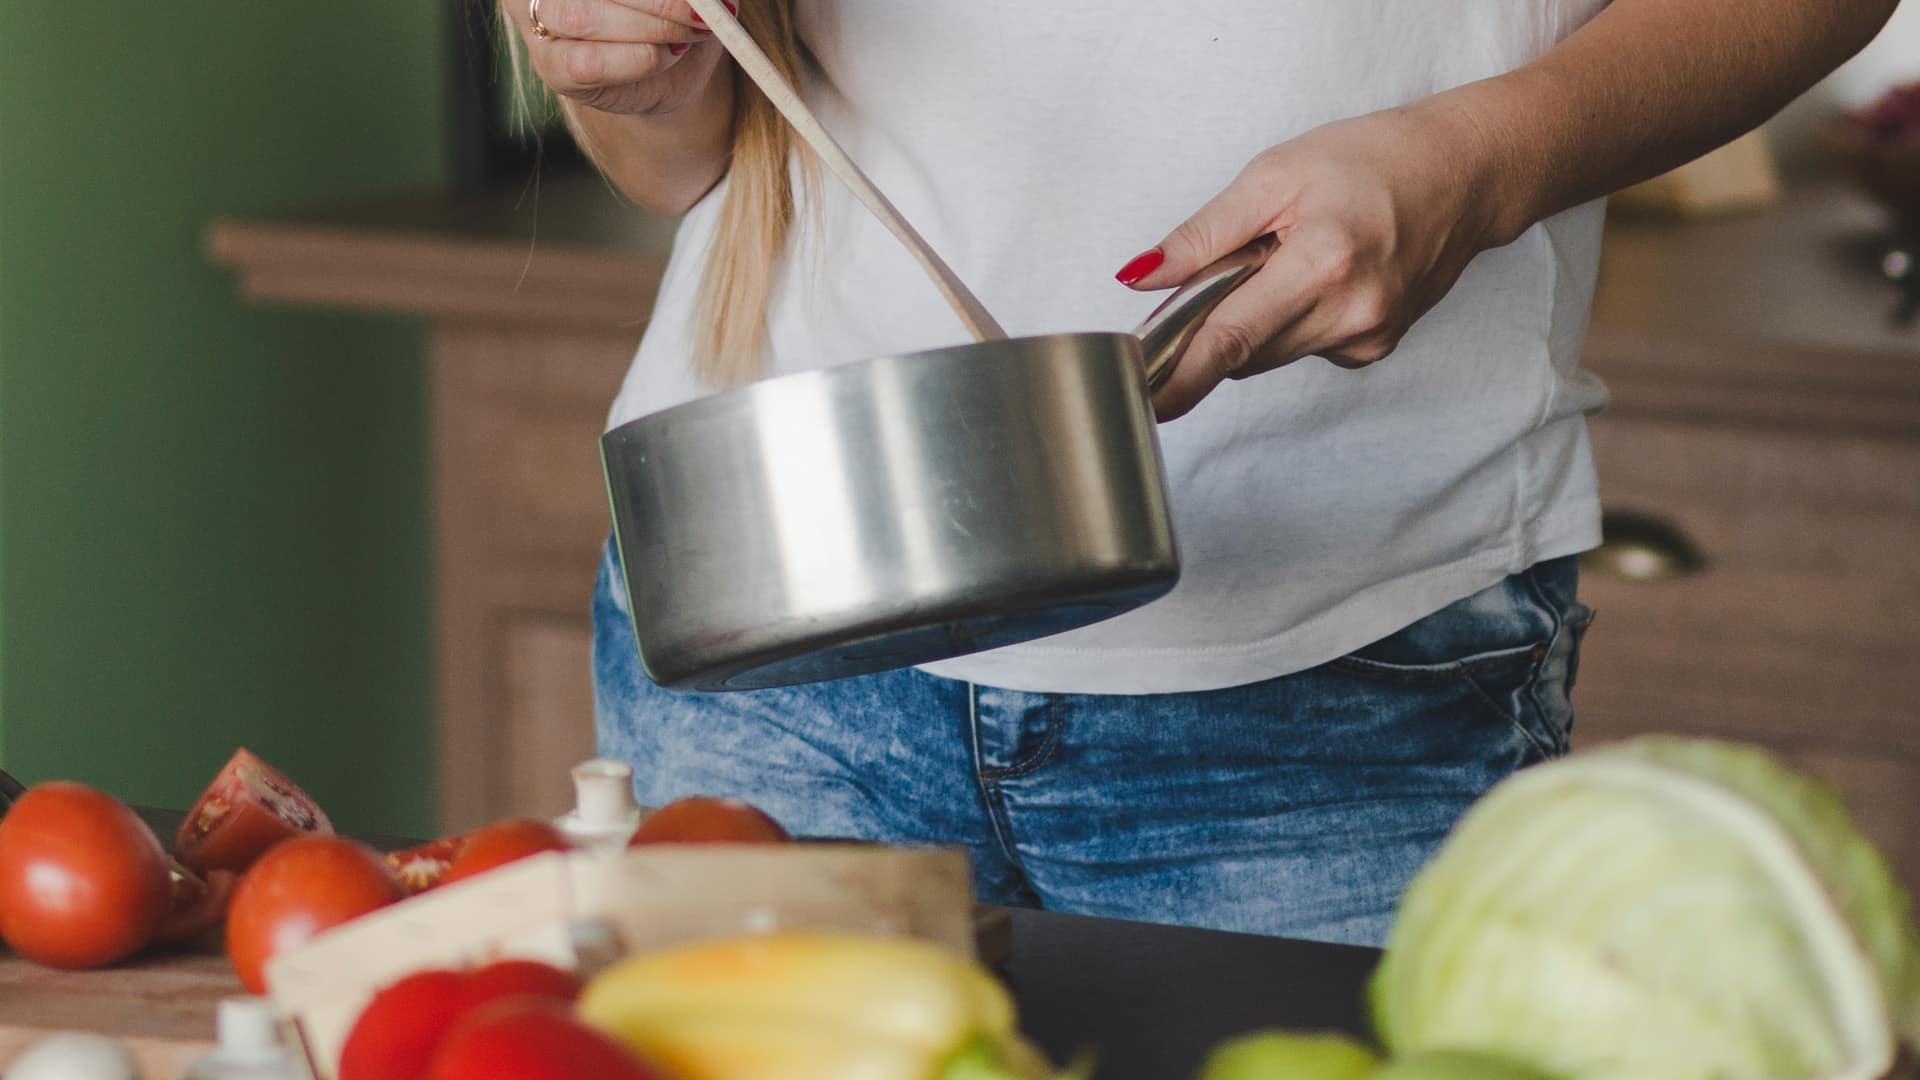 Woman cooking with metal pan in kitchen.